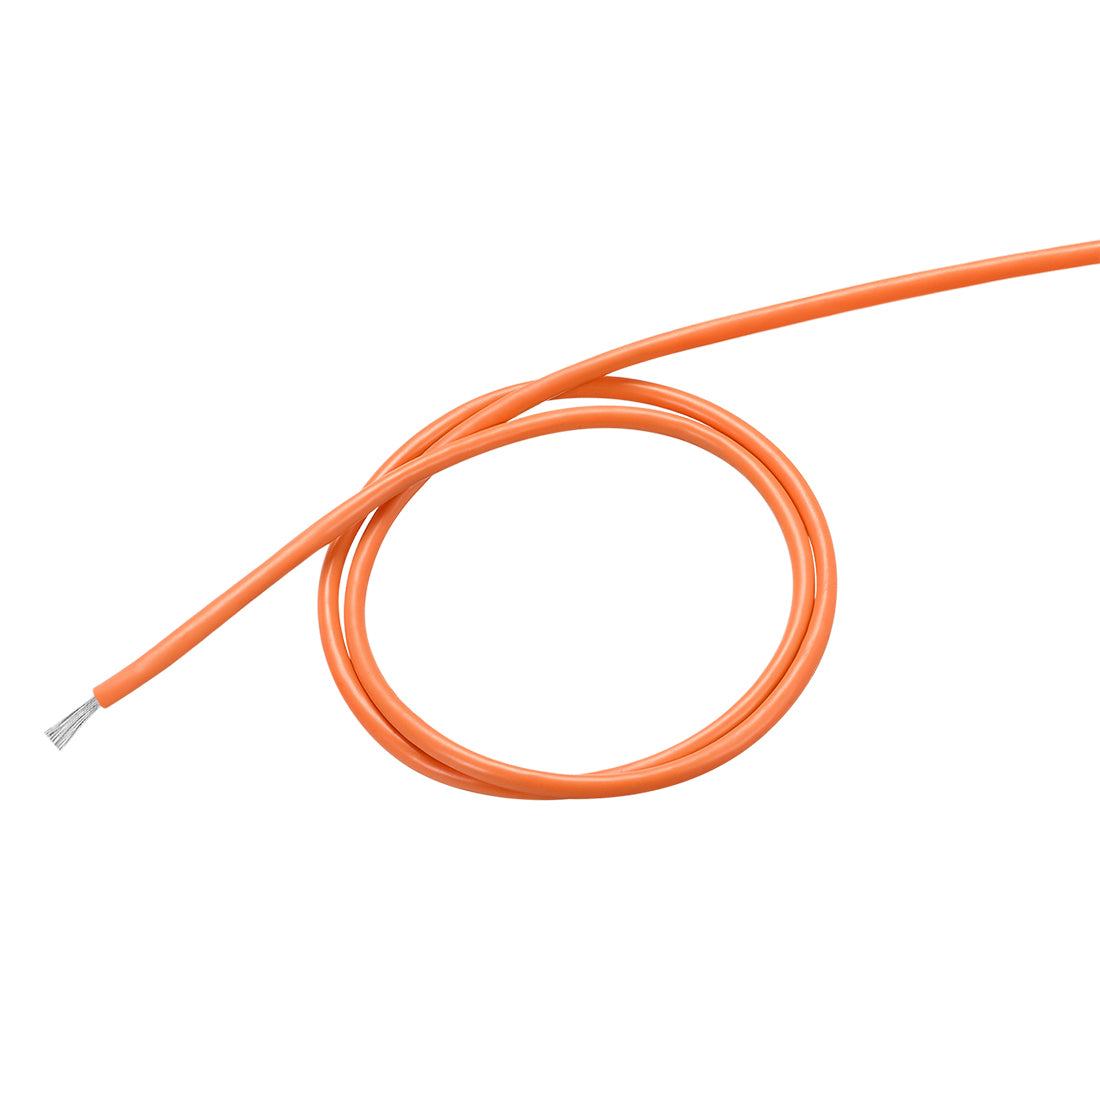 uxcell Uxcell Silicone Wire 28 AWG 33 Feet Electric Wire Strands of Tinned Copper Wire Orange